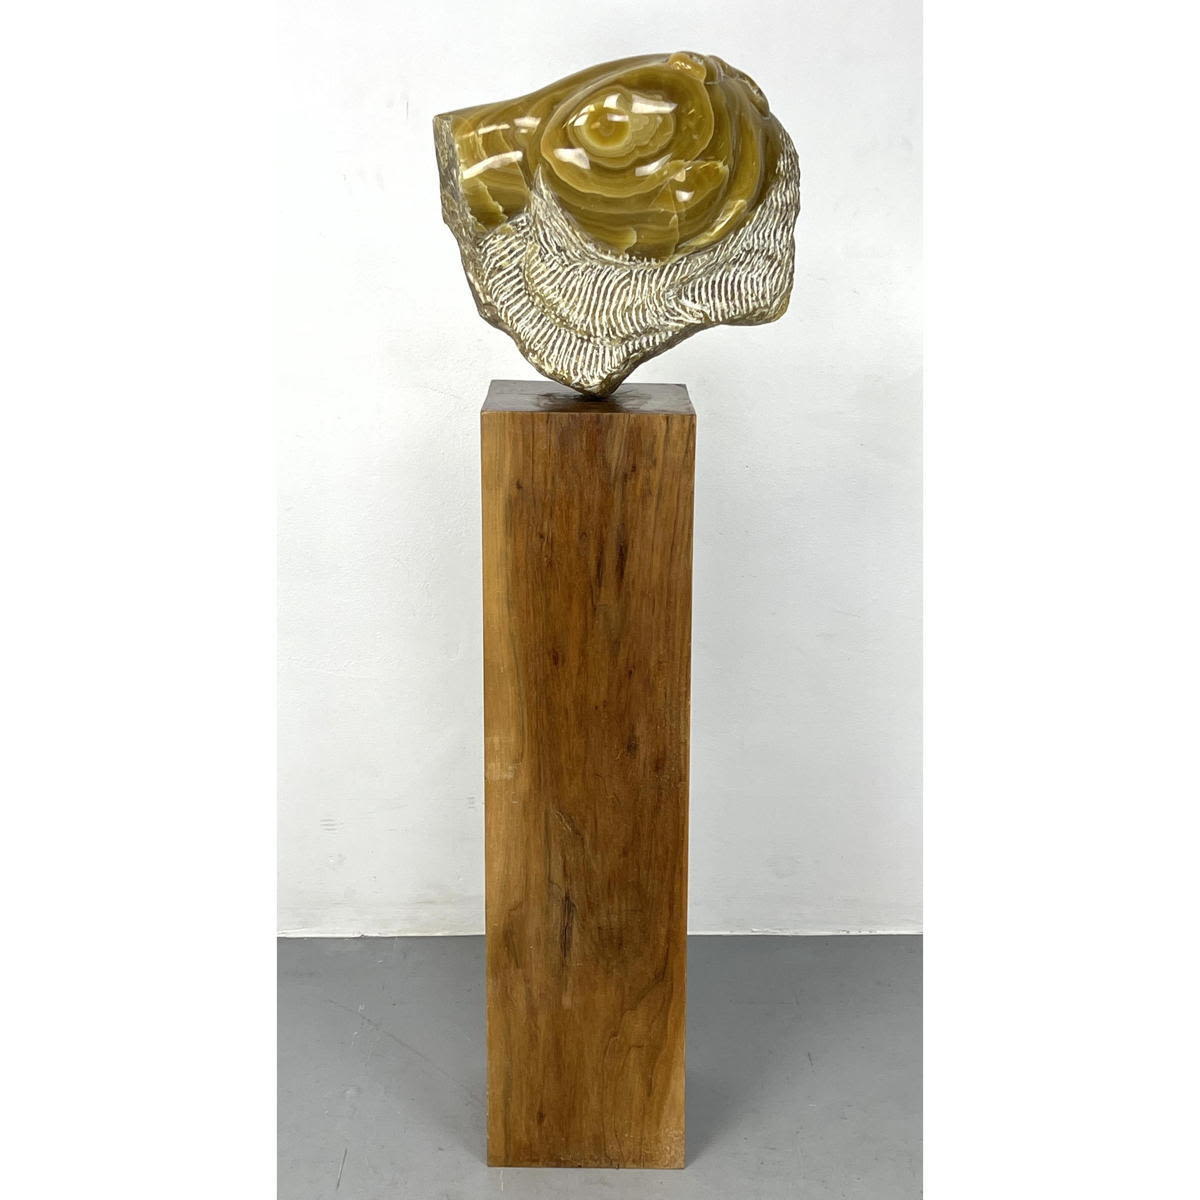 GREGNOR Abstract Modern Stone Sculpture